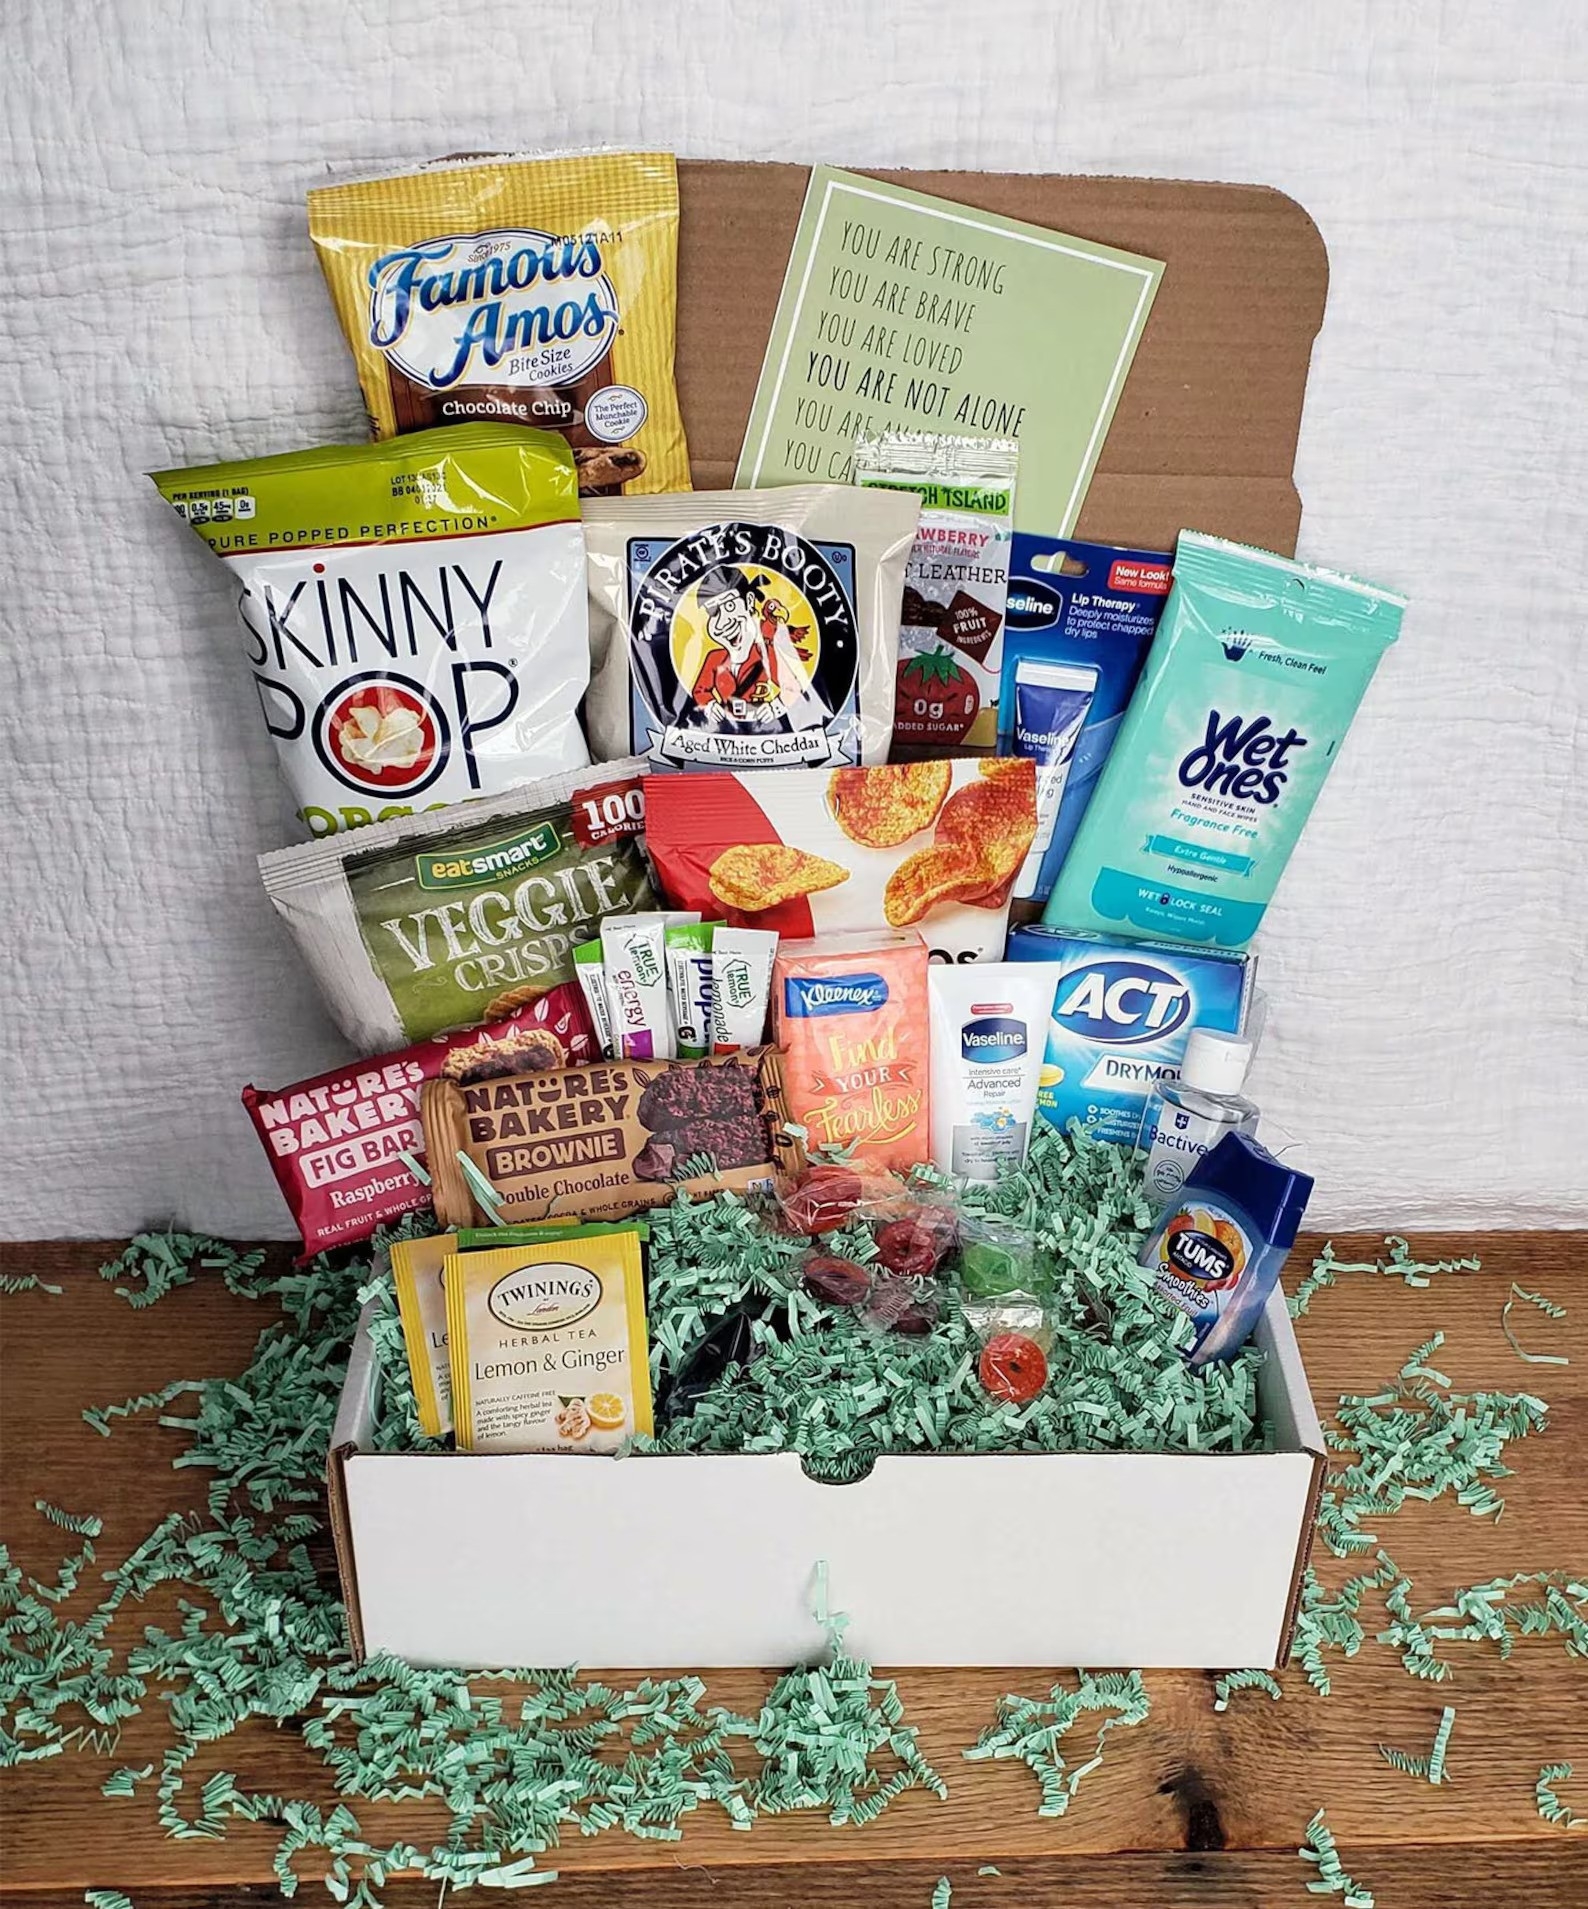 Assorted snack gift basket with inspirational message cards among various treats and self-care items